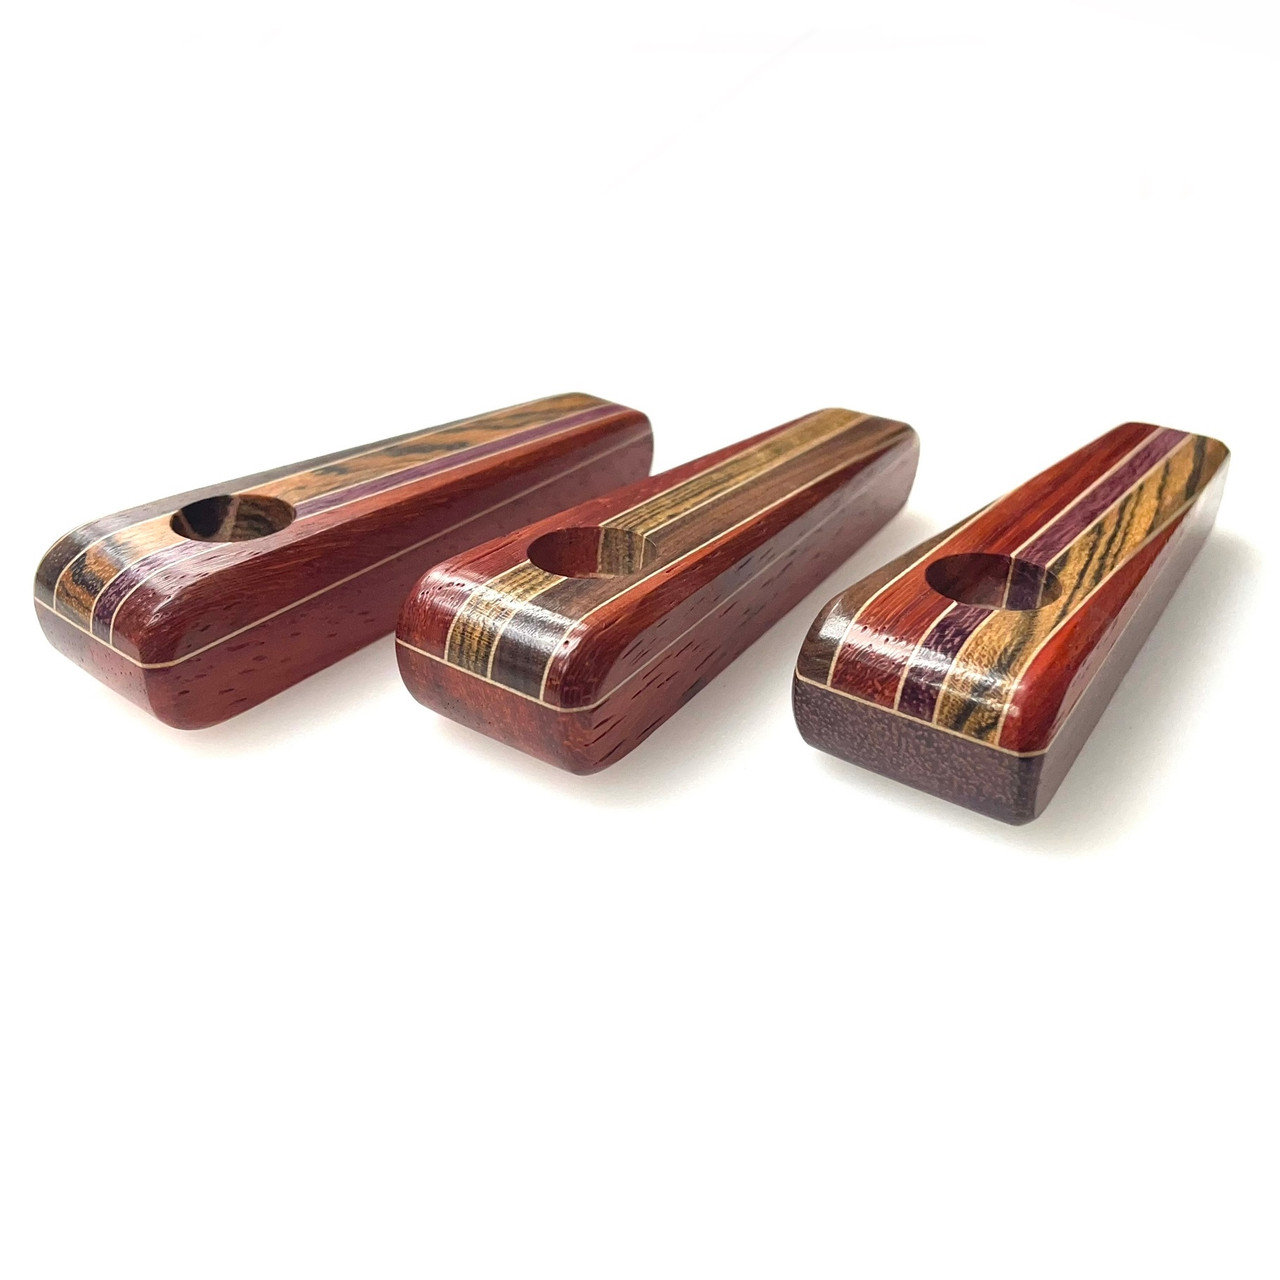 Mini Wood Stash Box with 3 Silicone Hand Pipe & Bic Lighter